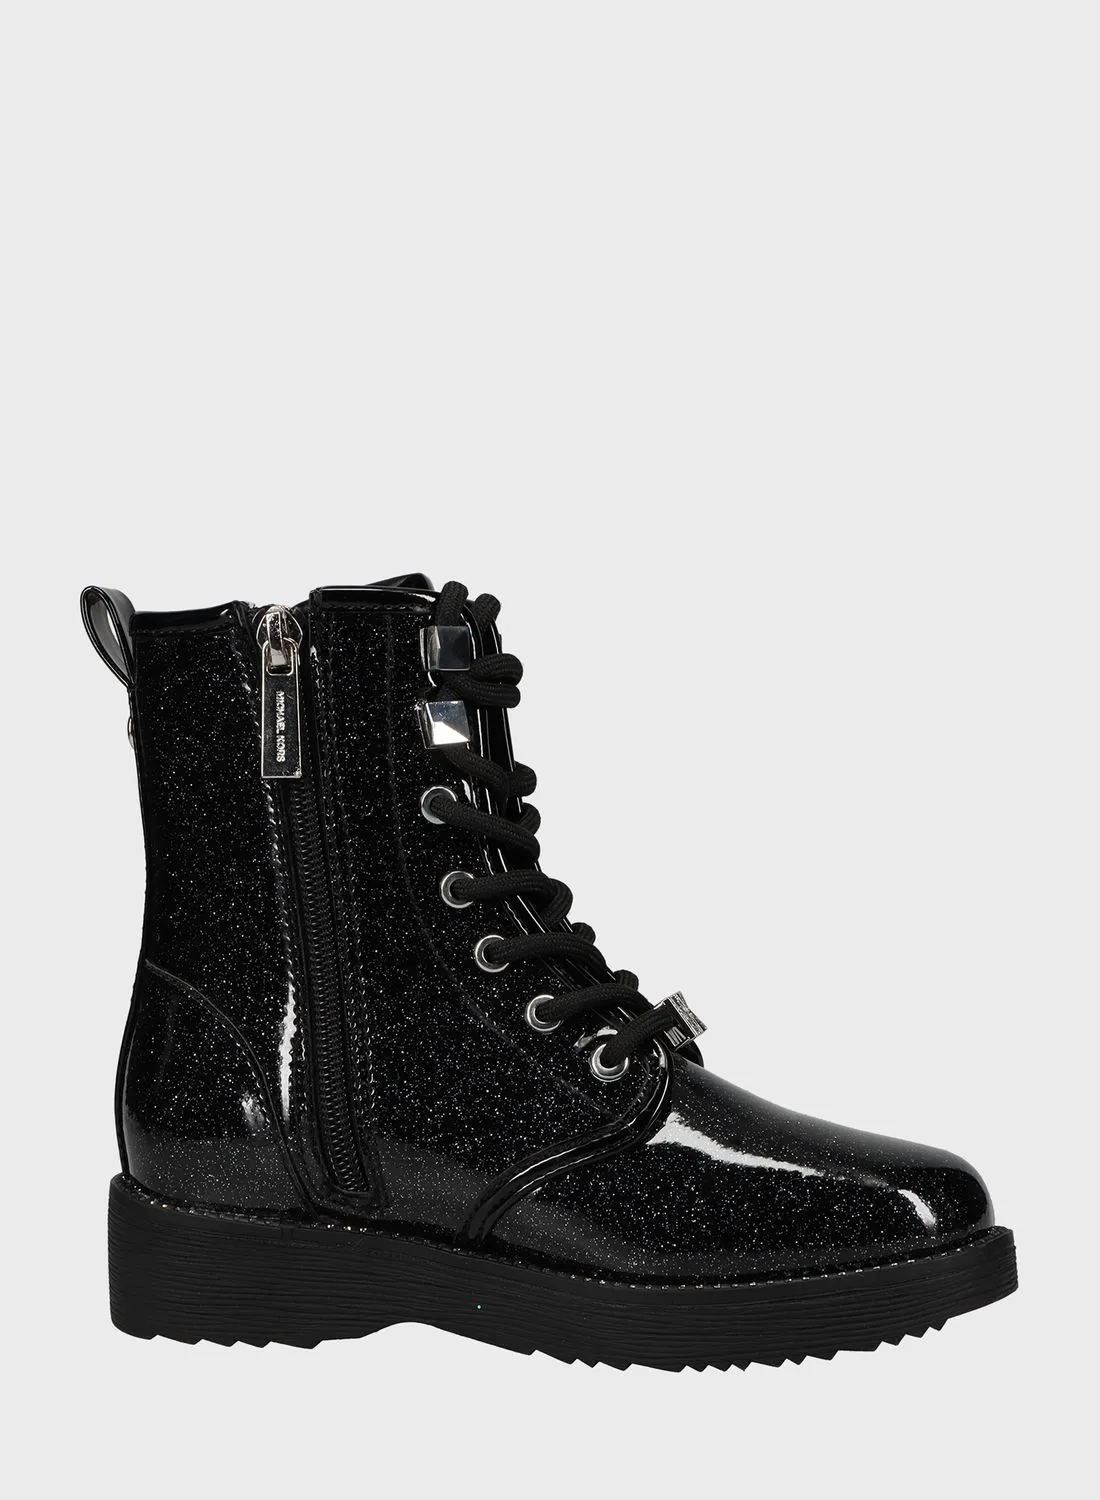 Michael Kors Youth Haskell Youth Boots